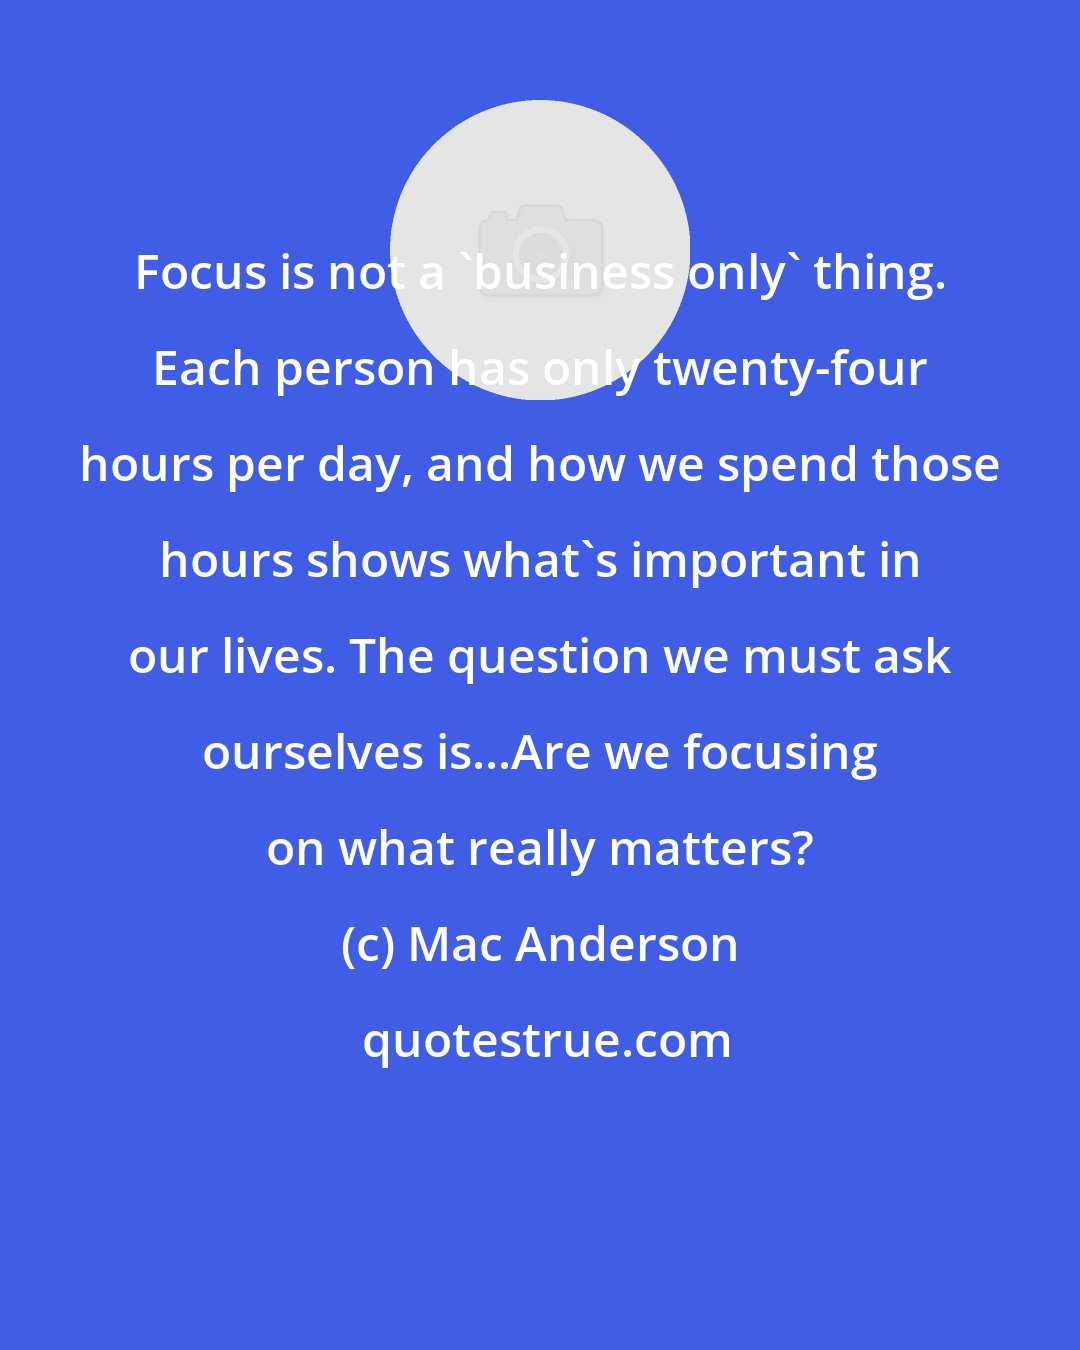 Mac Anderson: Focus is not a 'business only' thing. Each person has only twenty-four hours per day, and how we spend those hours shows what's important in our lives. The question we must ask ourselves is...Are we focusing on what really matters?